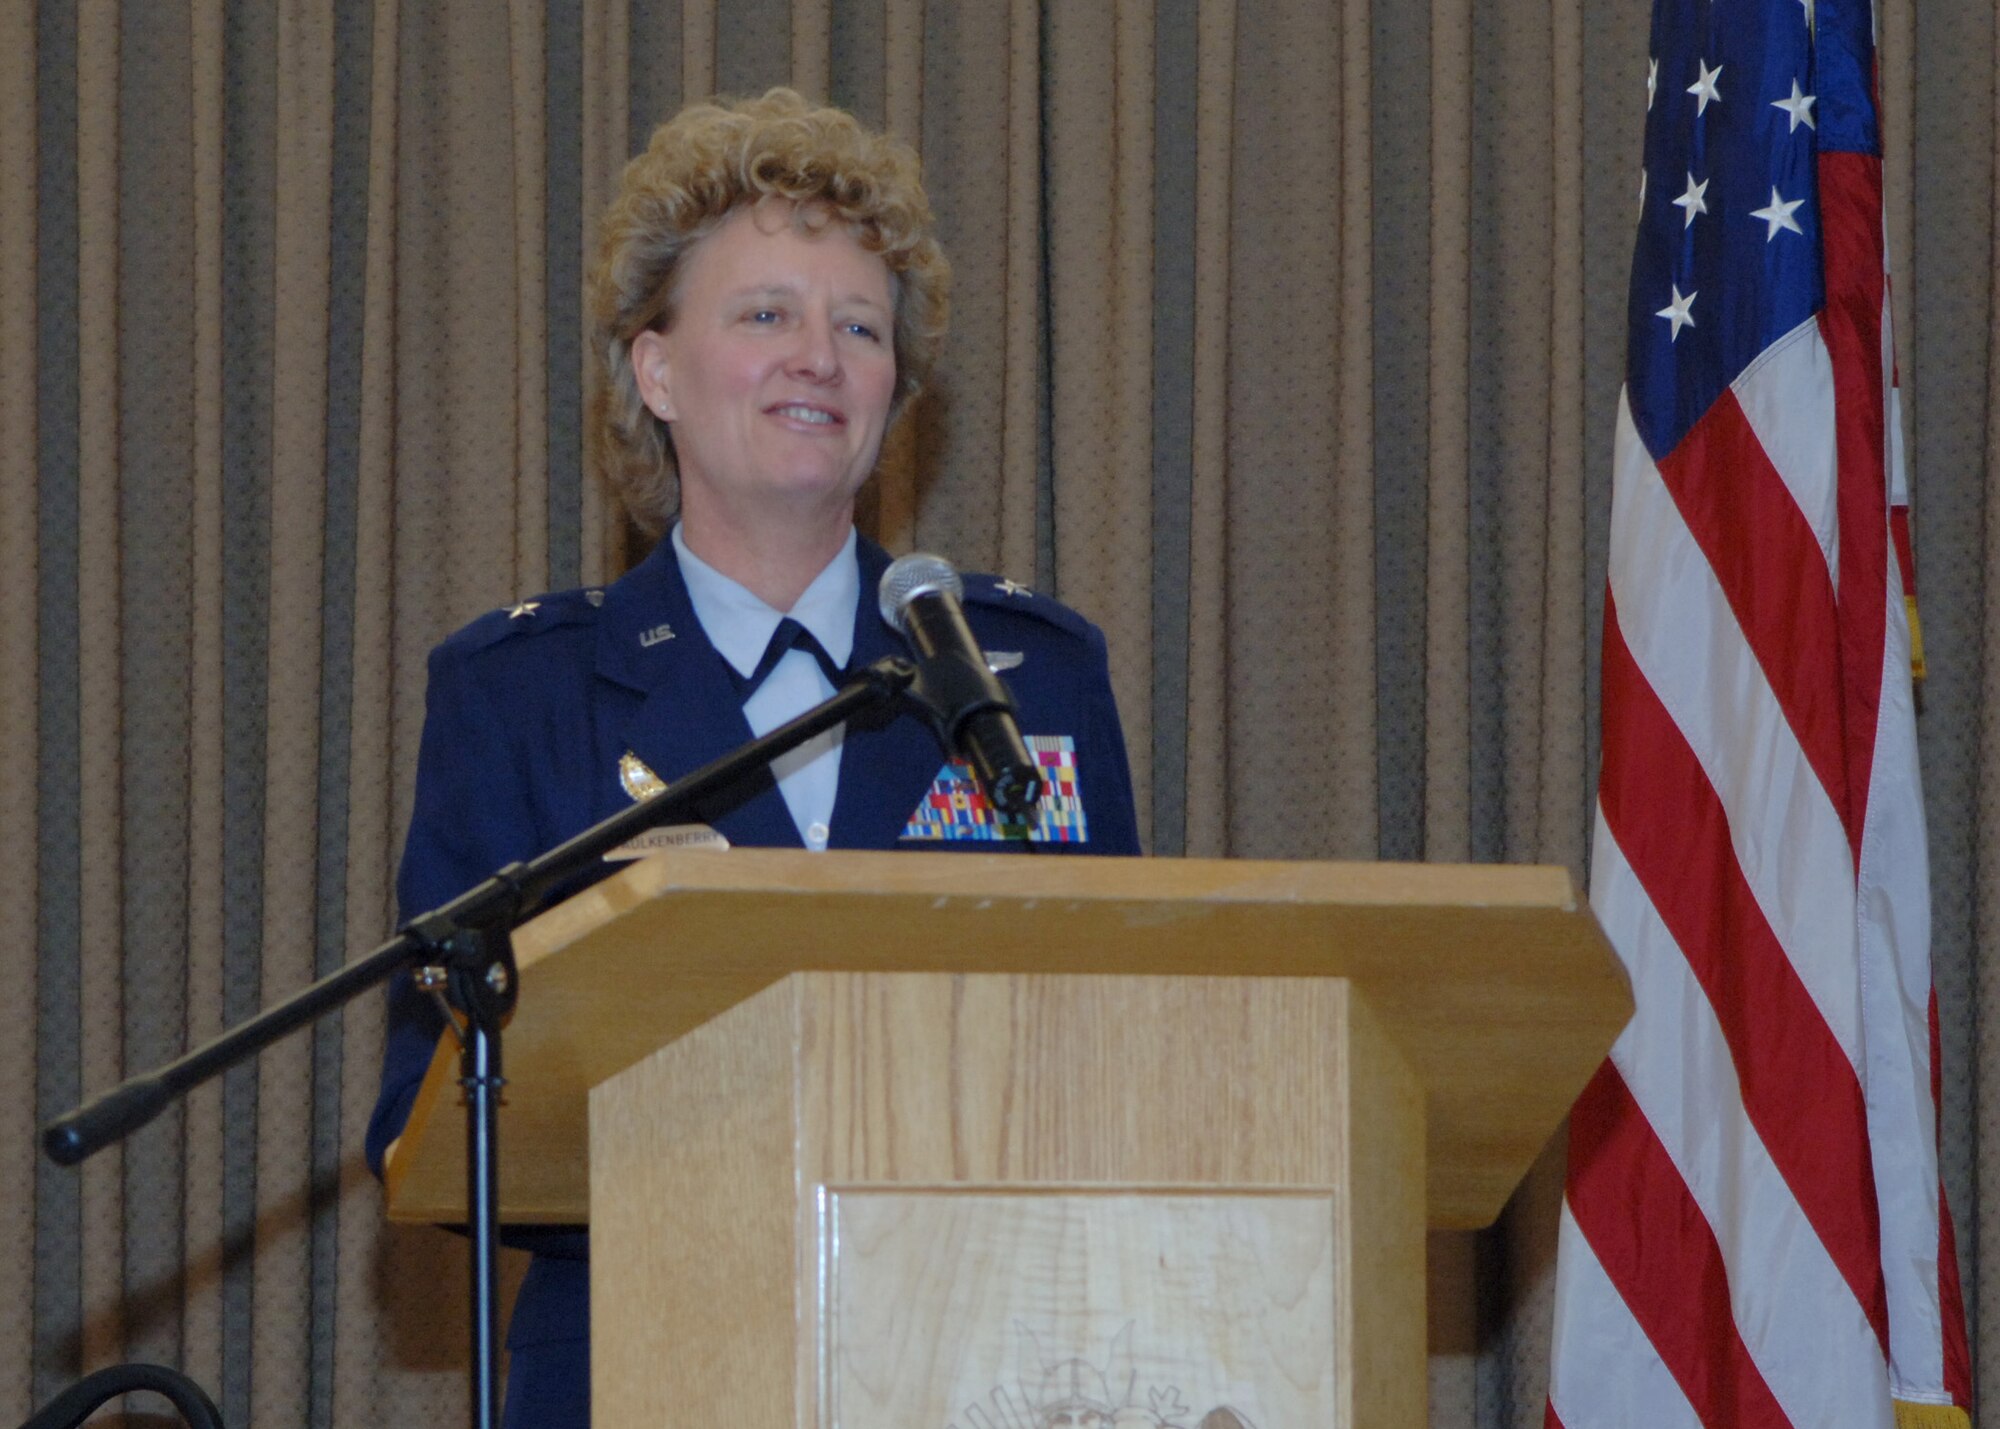 Brig. Gen. Barbara Faulkenberry, Deputy Director of Strategic Plans, Requirements and Programs, Headquarters Air Mobility Command, Scott Air Force Base, speaks to the members of Grand Forks Air Force Base, during the annual women?s heritage luncheon March 18 at the Northern Lights Club. General Faulkenberry talked about women in the past, the obstacles they have faced and about seizing the day. (U.S. Air Force photo by Senior Airman Tiffany Colburn)

